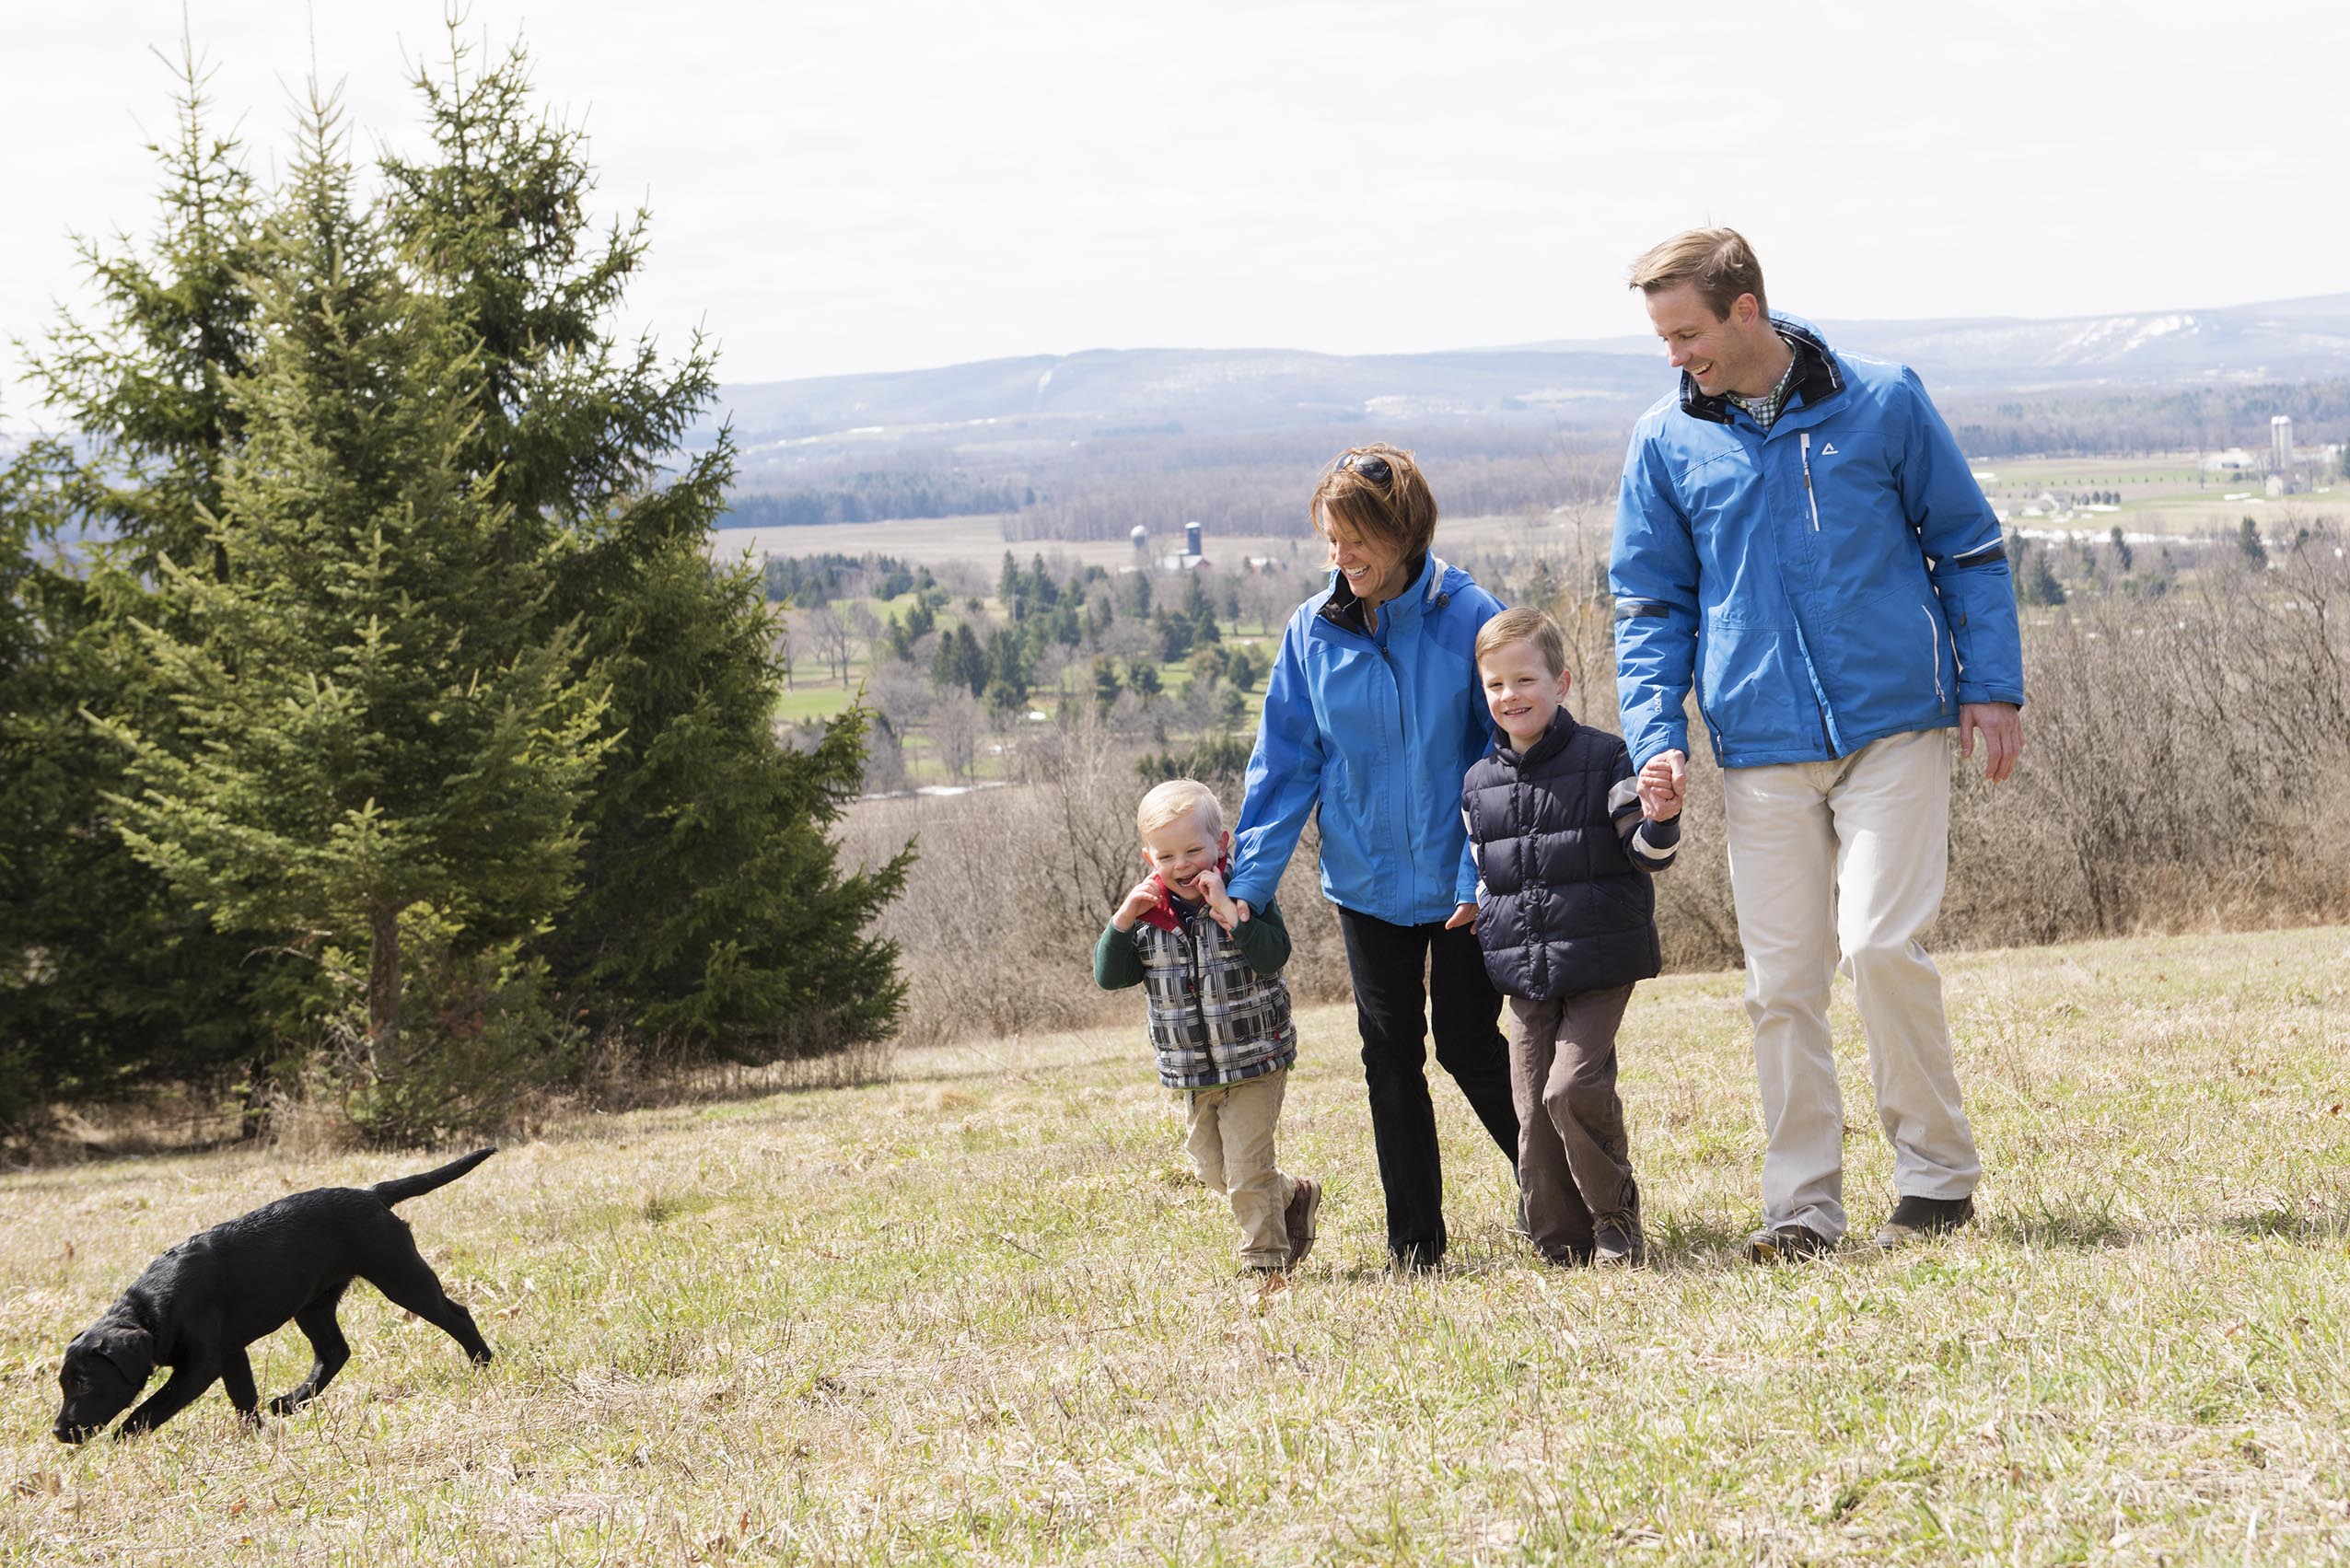 Several months after his stroke, Kyle Reger takes a walk with his wife, Martha Velky-Reger, and their sons, Jackson, left, and Max, this spring near their Cazenovia home. (PHOTO BY SUSAN KAHN)